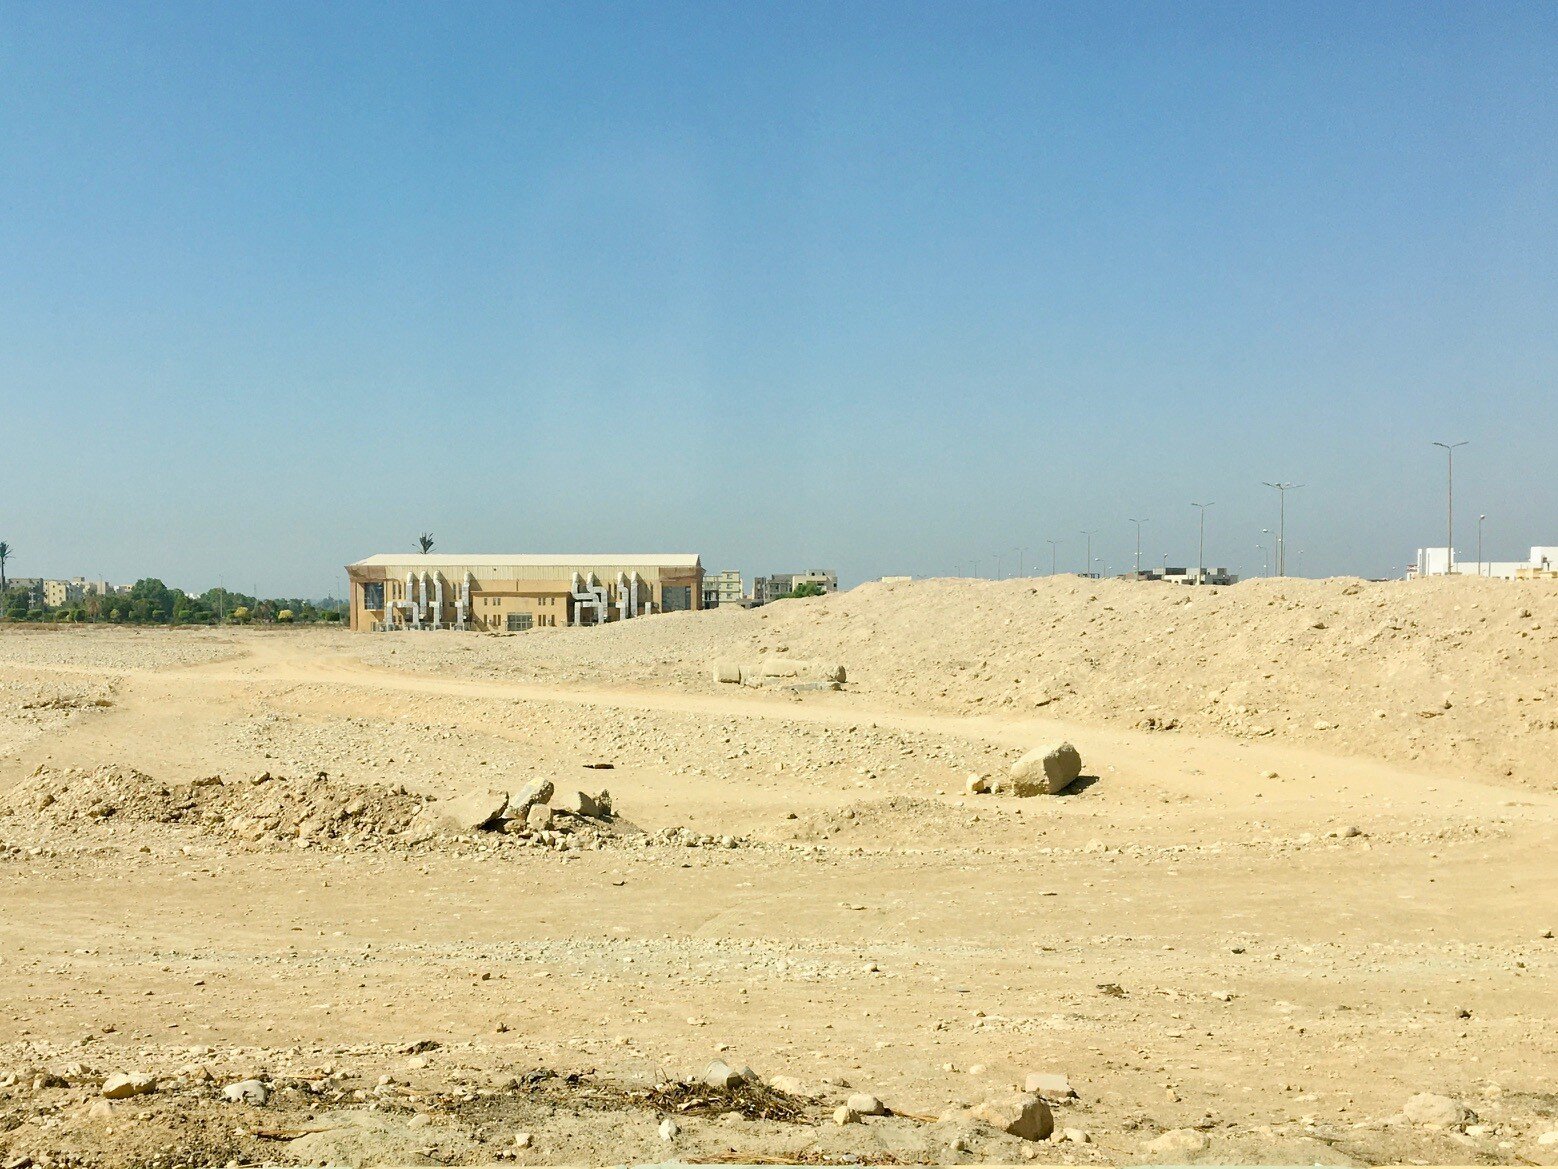  A new city being built outside of Luxor has made space for a new Presbyterian Church to take form—and, with God’s help, make a new impact for the Gospel in this historic part of Egypt 